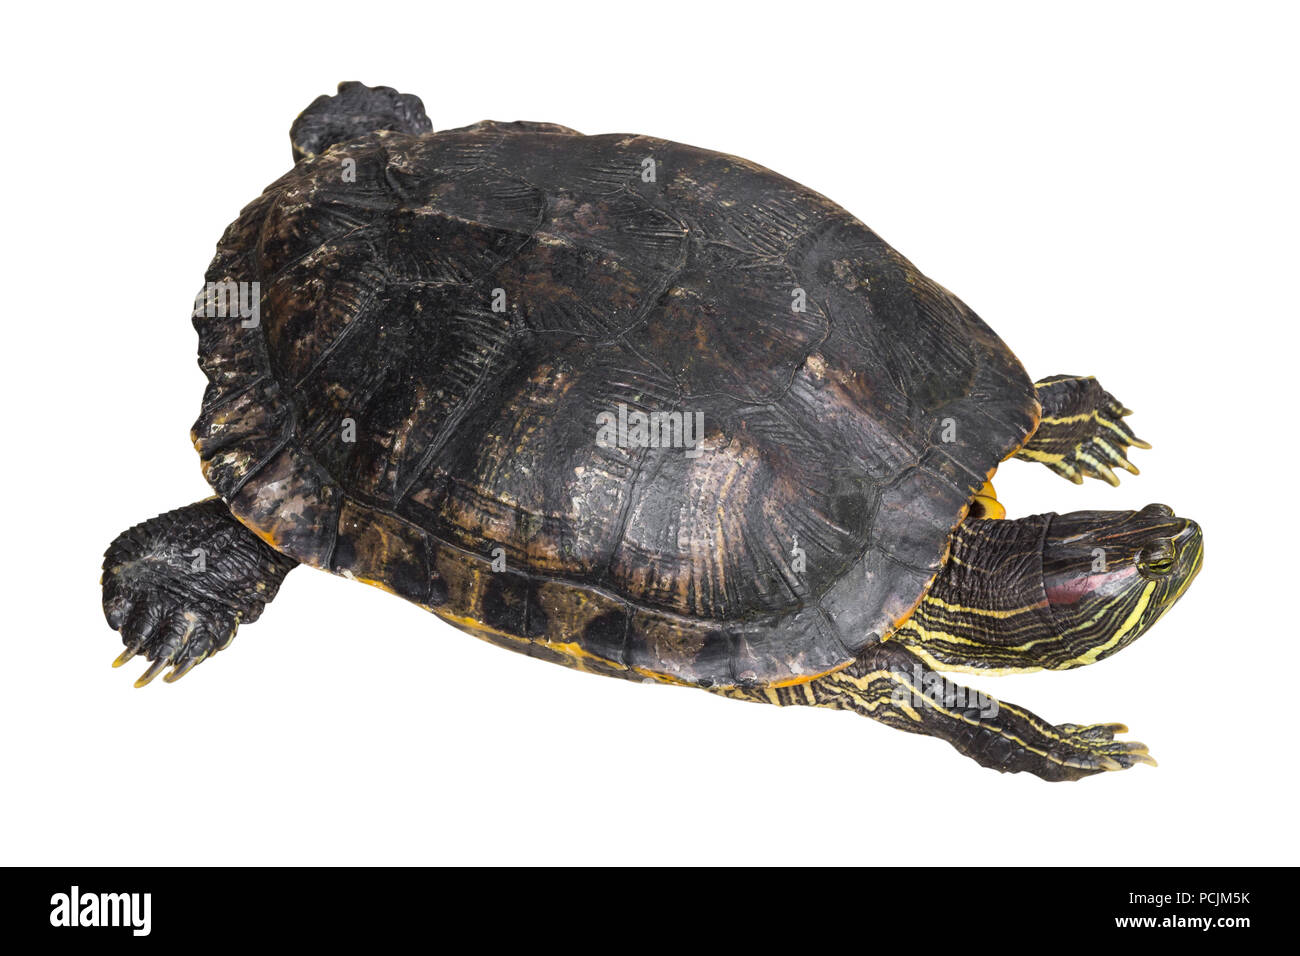 Red eared slider turtle ( Trachemys scripta elegans ) is creeping and raise one's head on white isolated background . Top view . Stock Photo